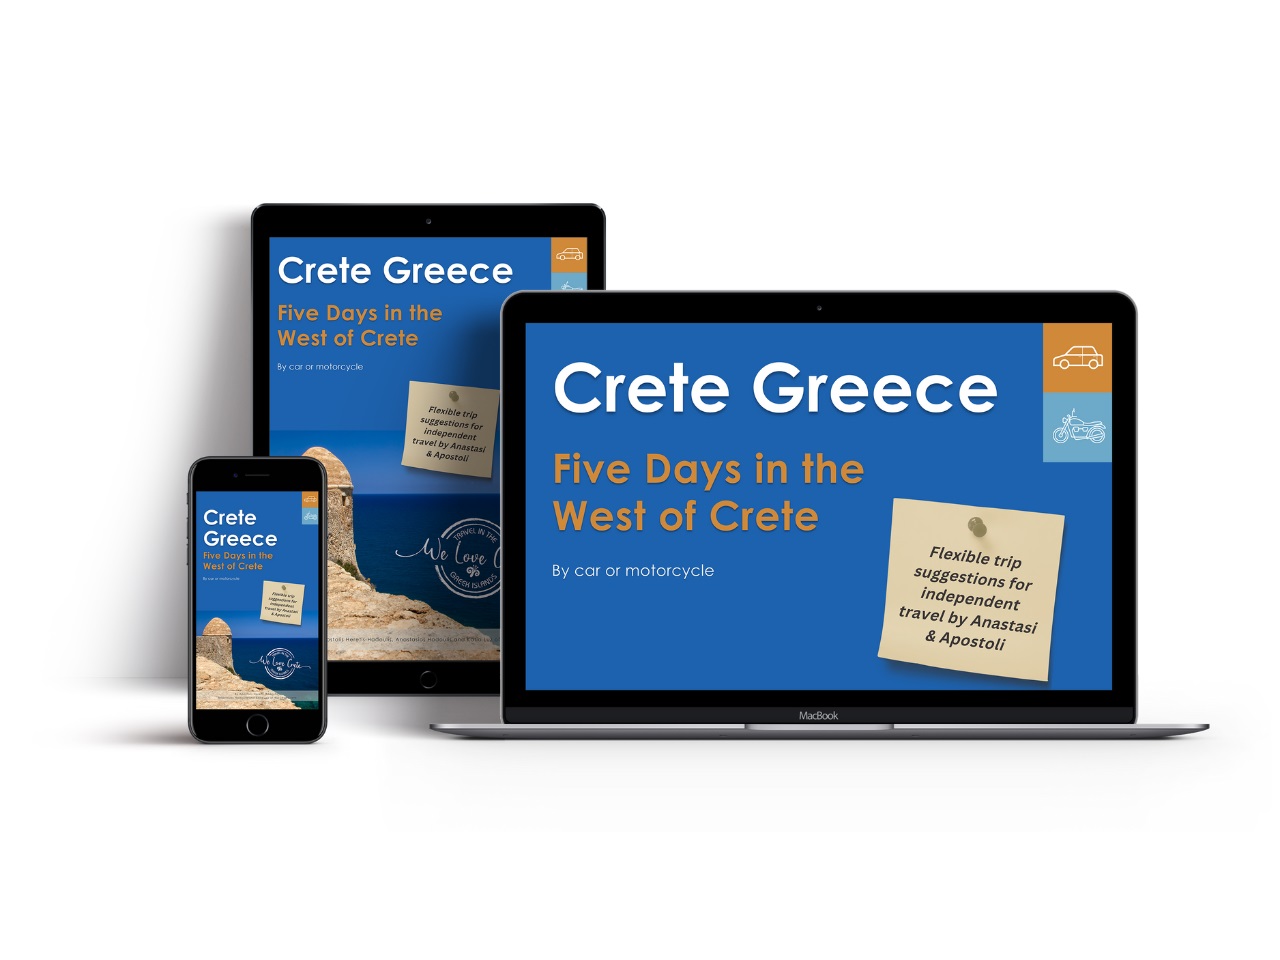 Five Days in the West of Crete by Car or Motorcycle by The We Love Crete Team